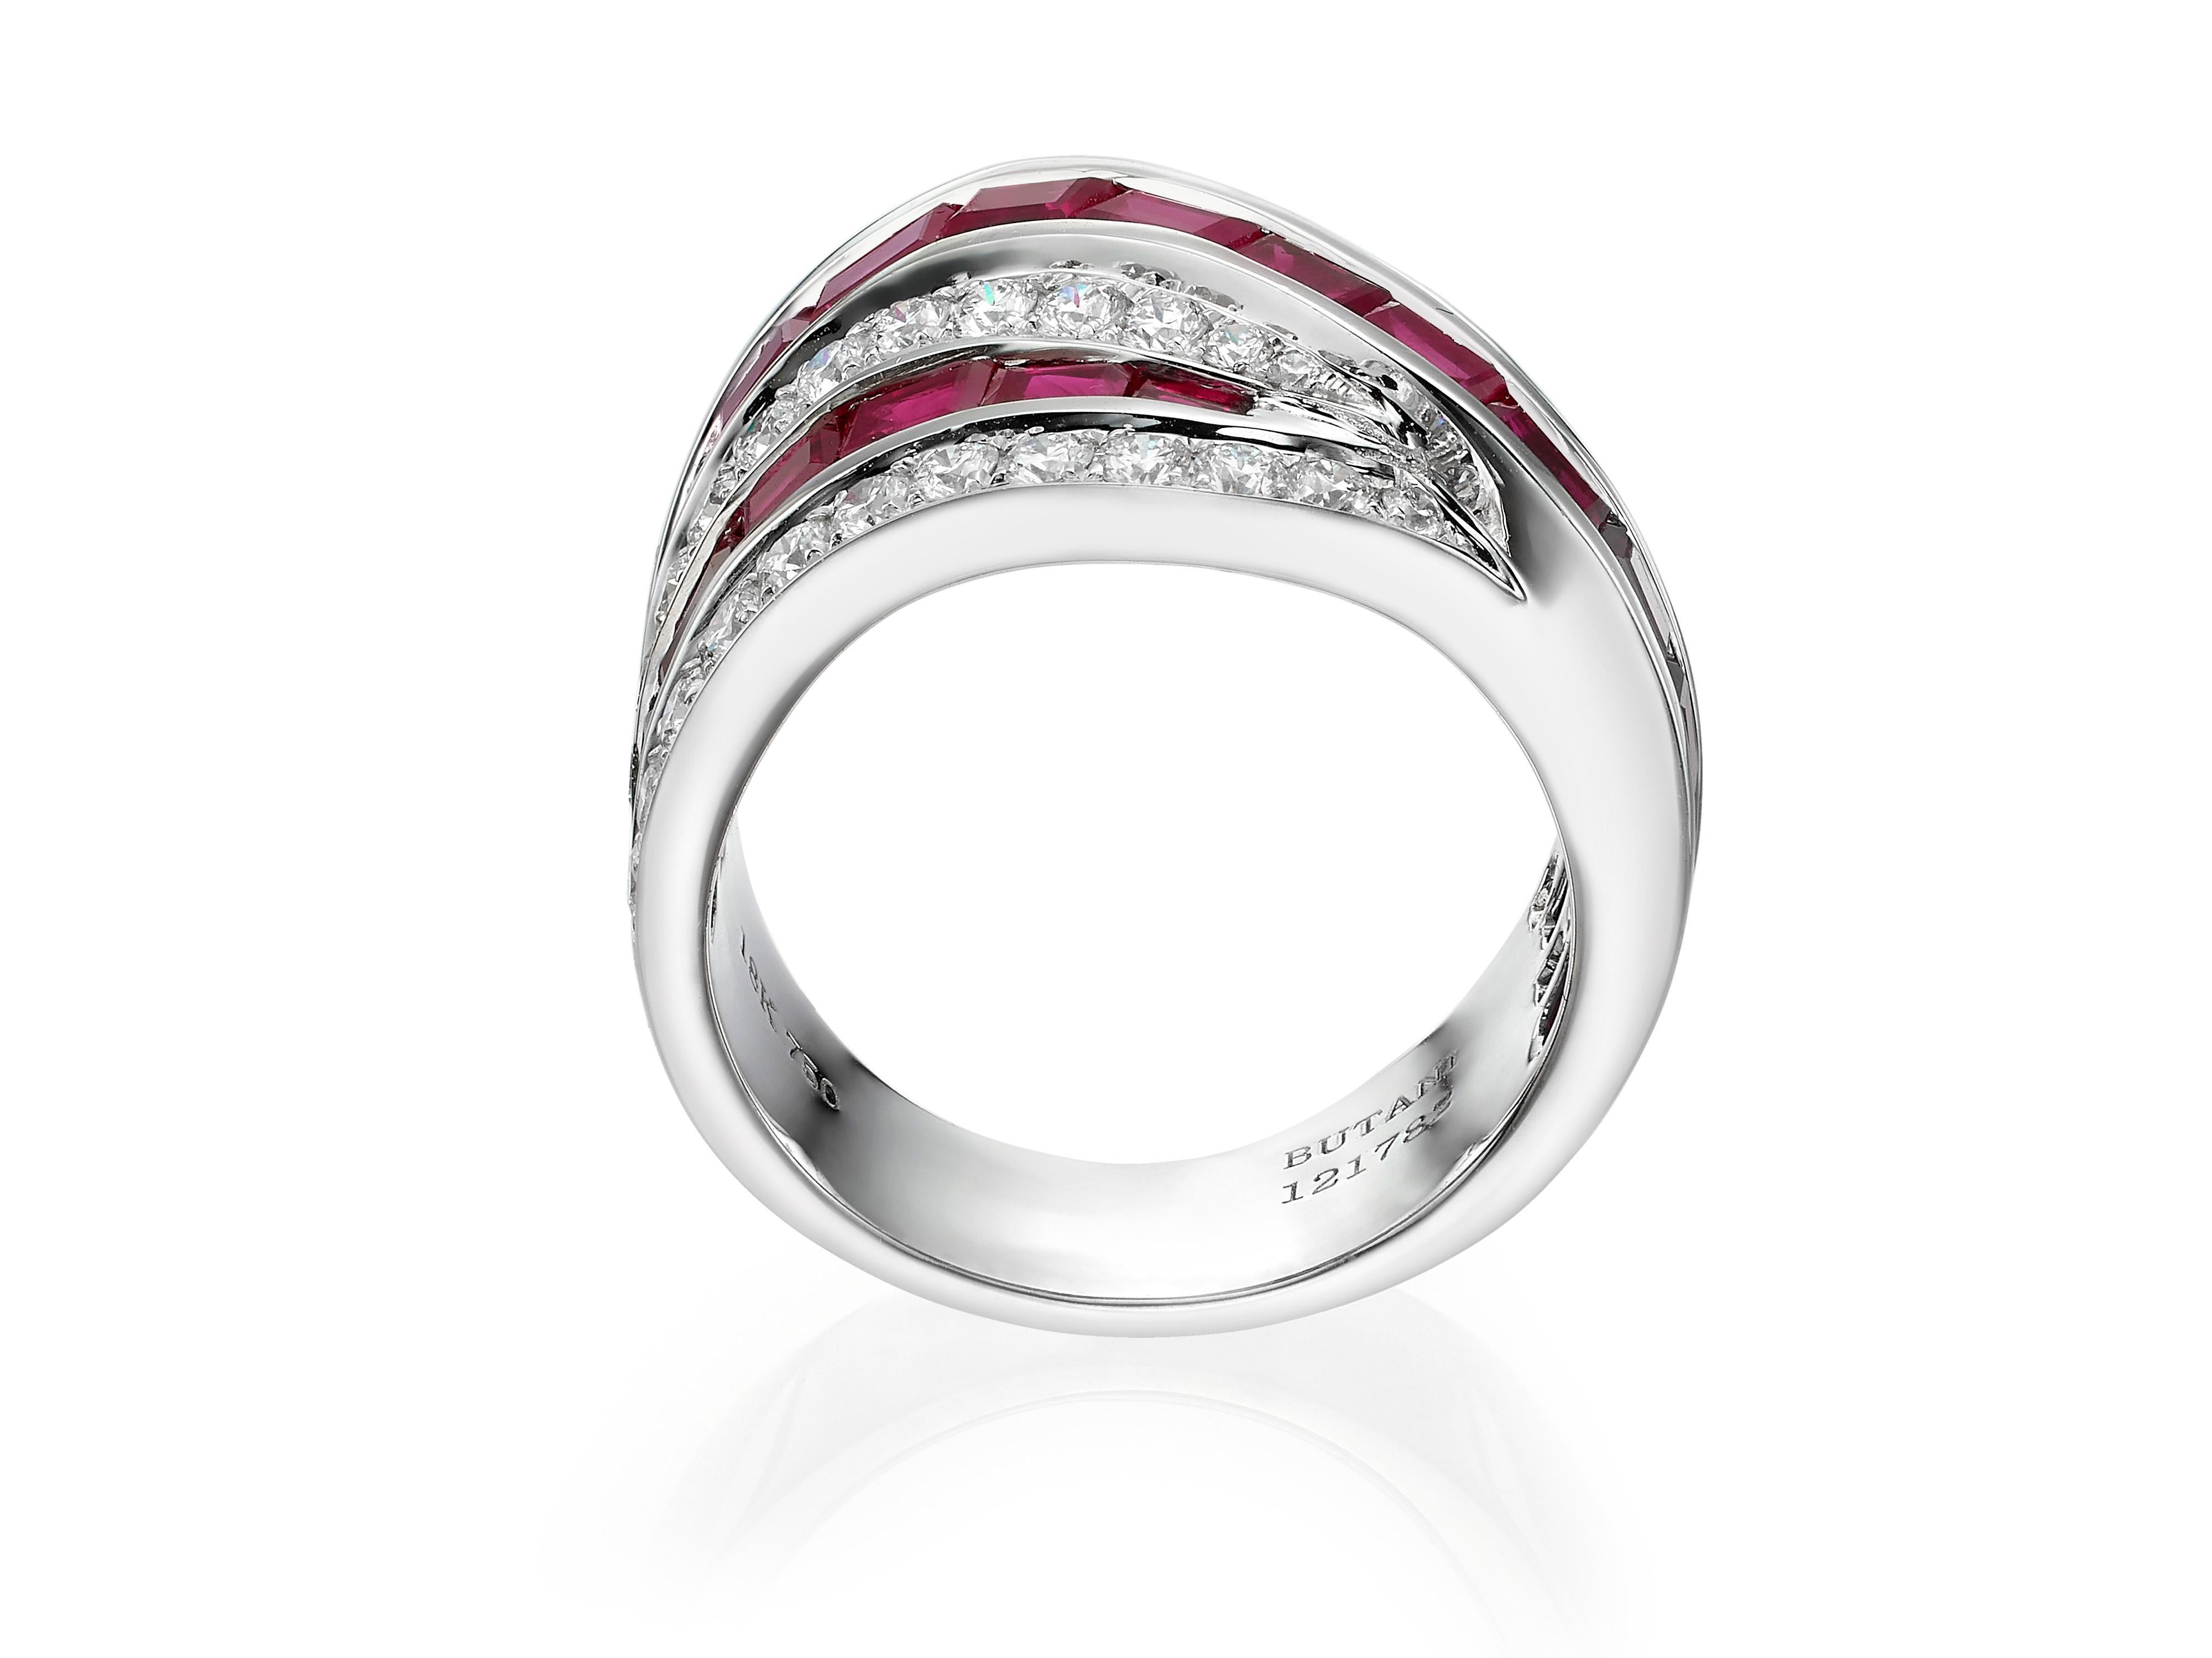 A beautifully crafted band cocktail ring with 5.63 carats of vivid red baguette rubies and round white diamonds.  Set in 18K white gold.  
Currently a ring size US 6 3/4.  For other sizes, please contact seller. 

Composition:
18K white gold
26